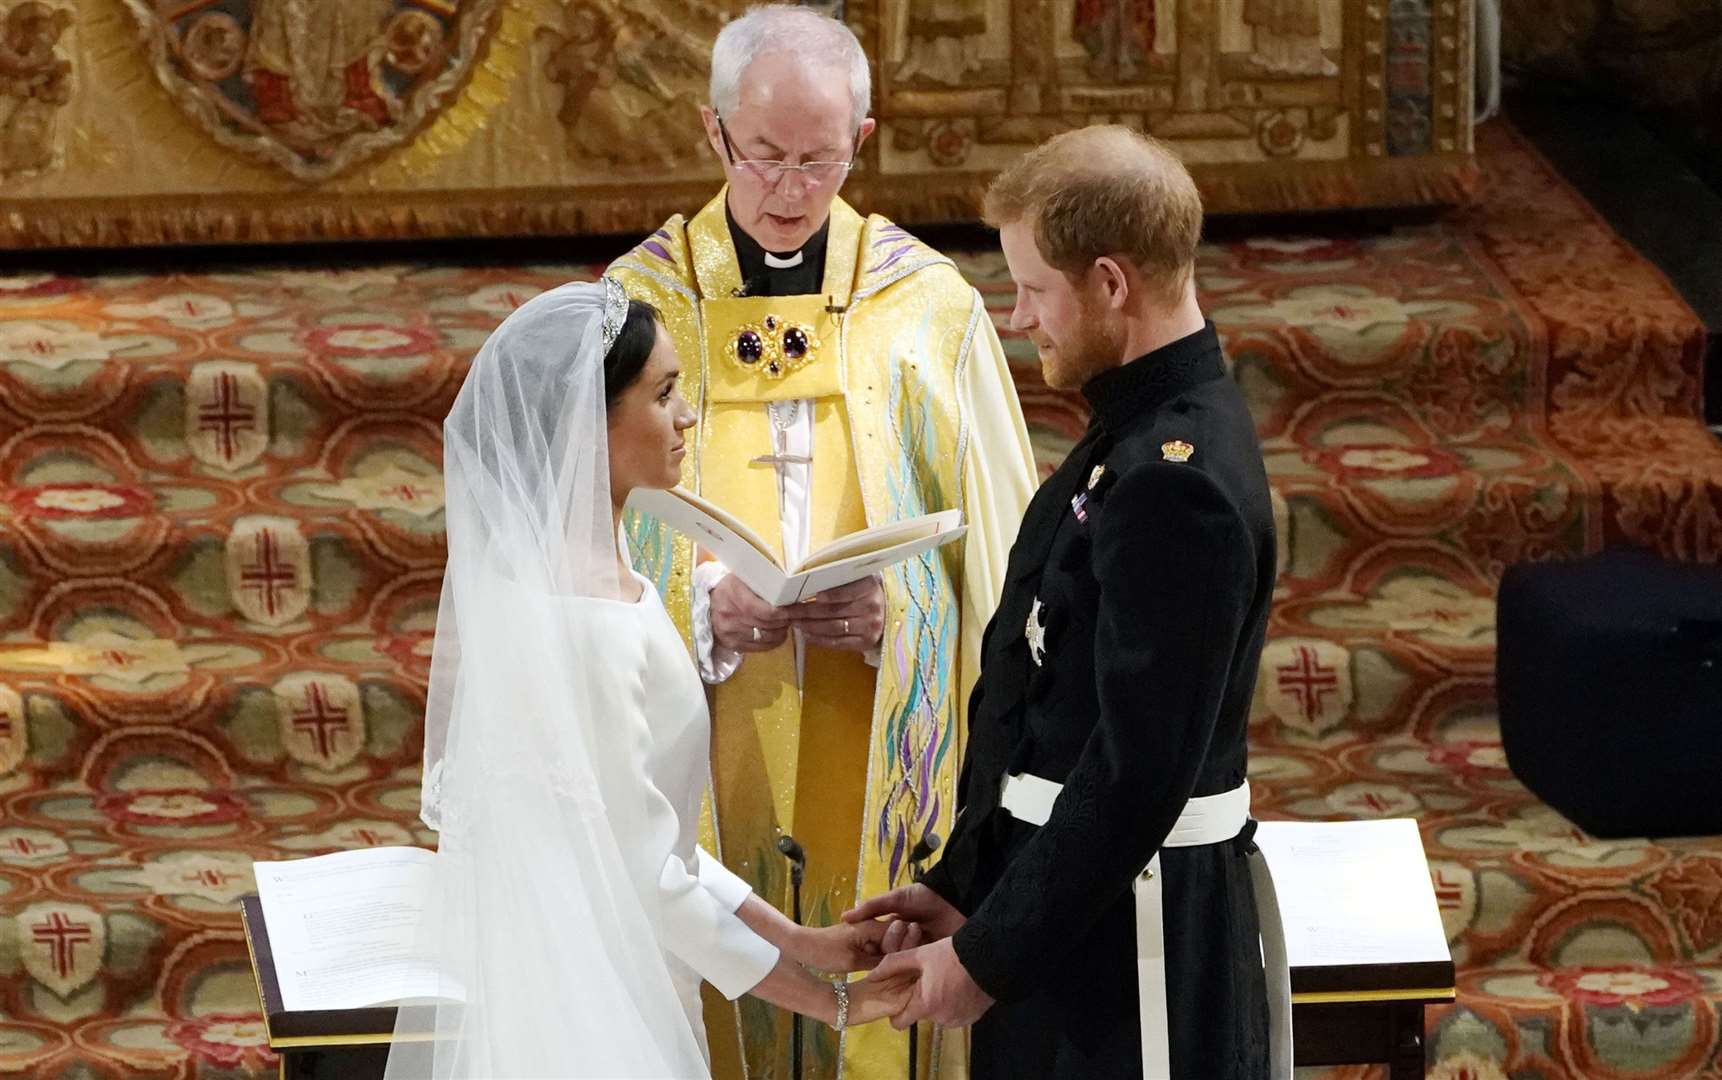 Prince Harry and Meghan Markle exchange vows in St George's Chapel at Windsor Castle conducted by the Archbishop of Canterbury Justin Welby. Photo credit Owen Humphreys/PA Wire.